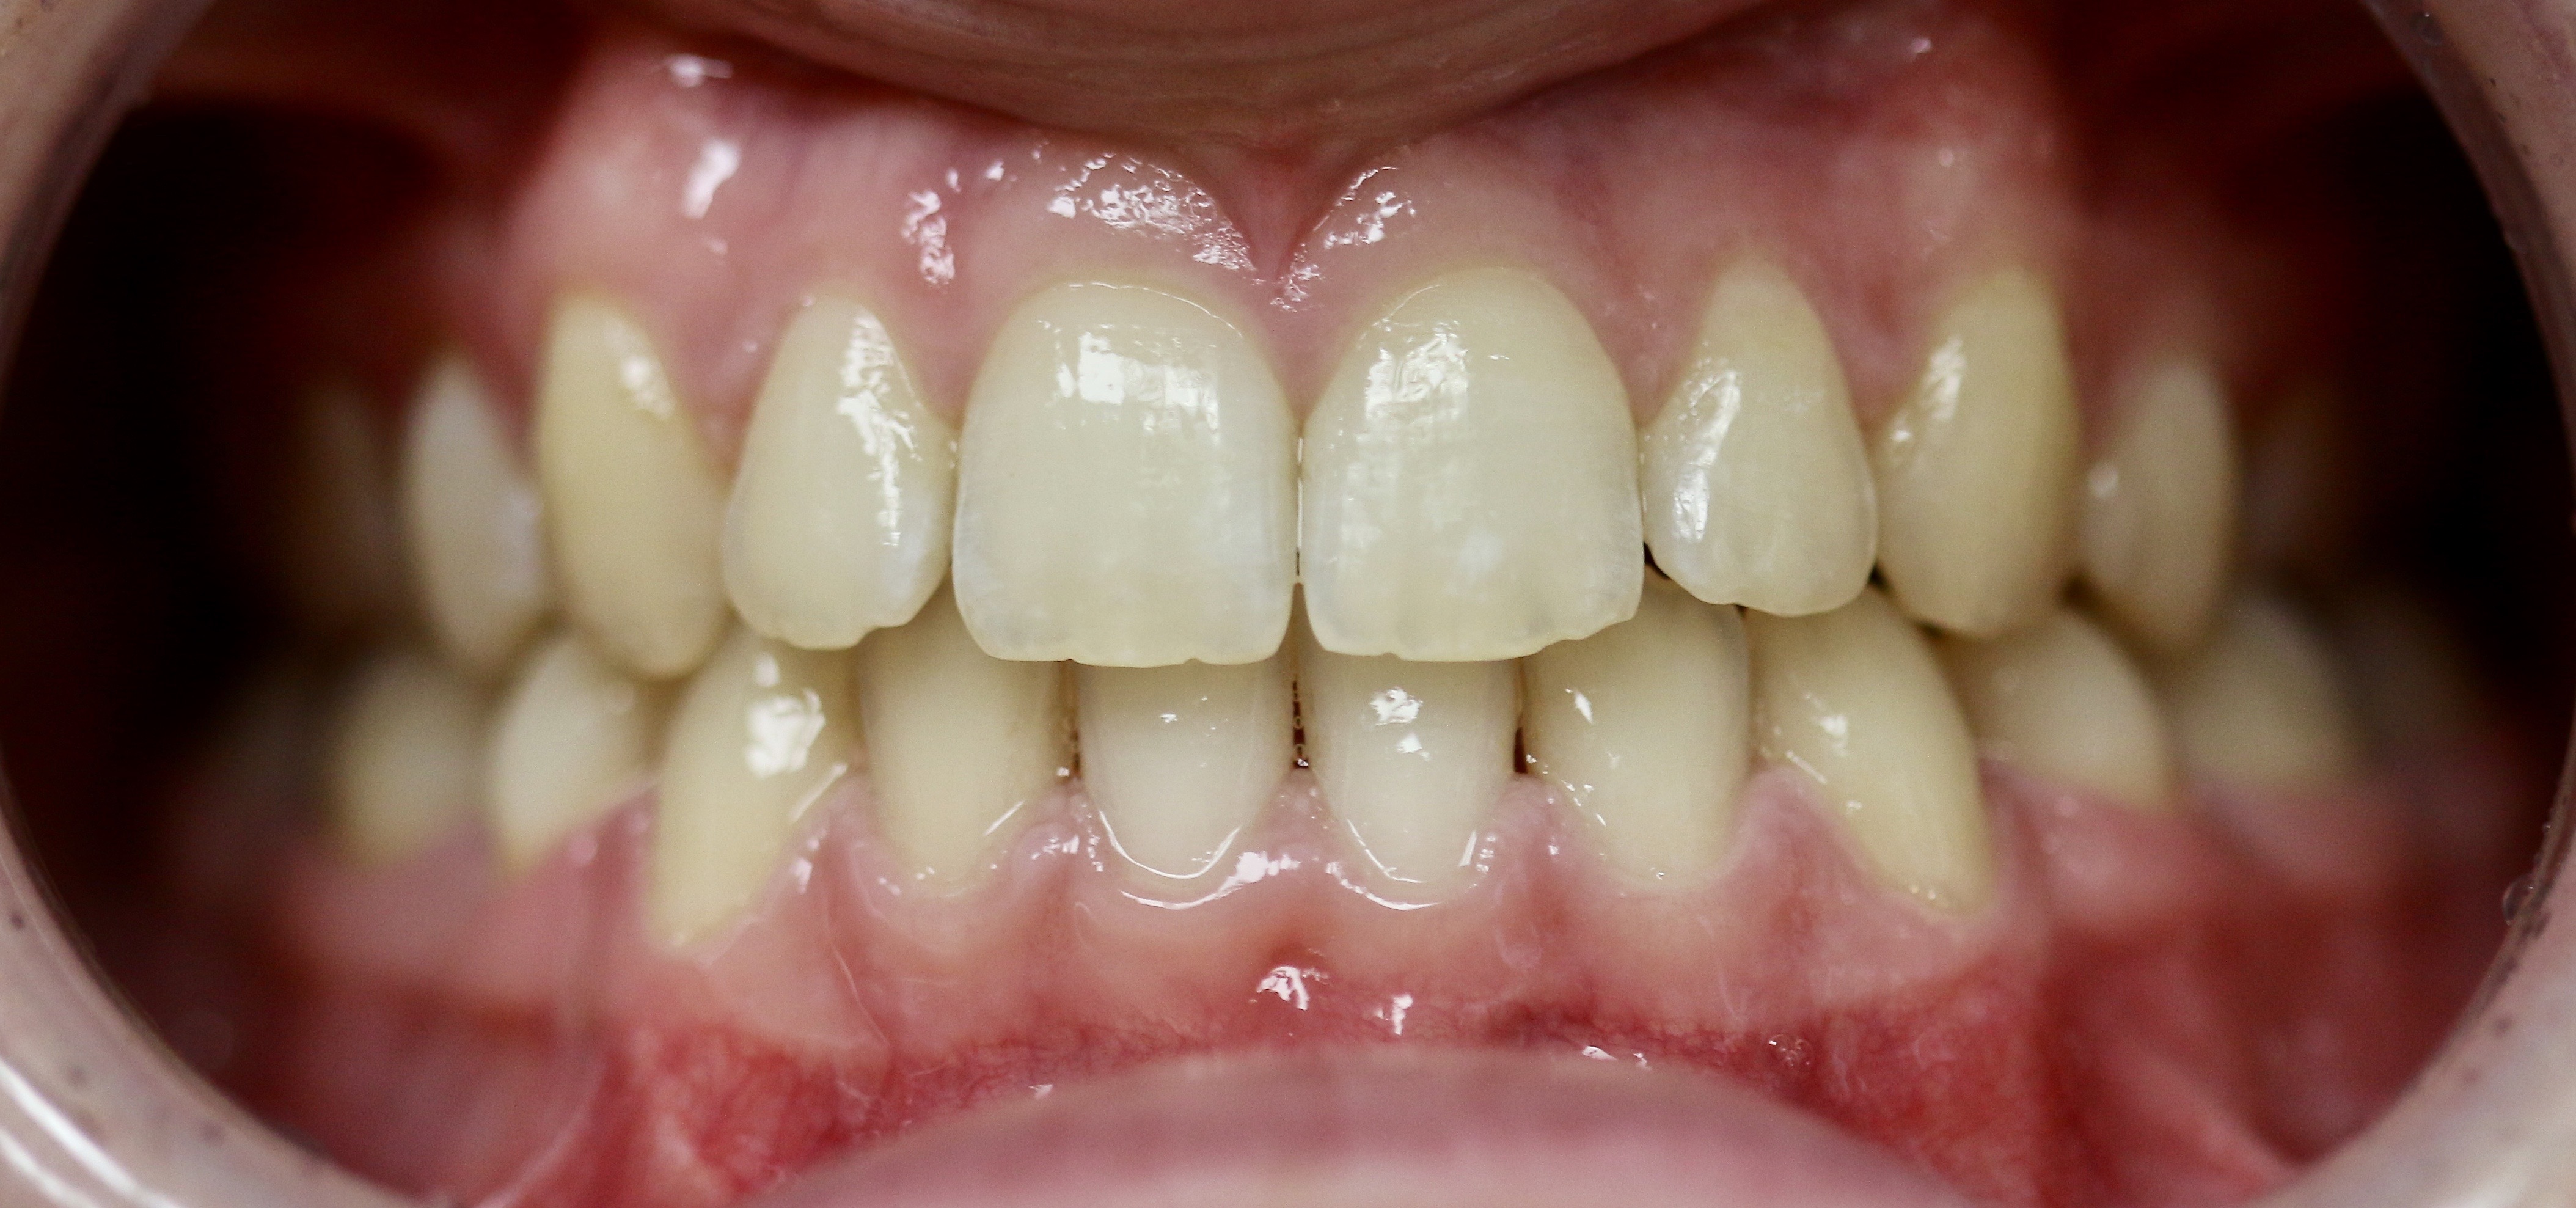 Orthodontics And Braces In Nelson Before And After Photos